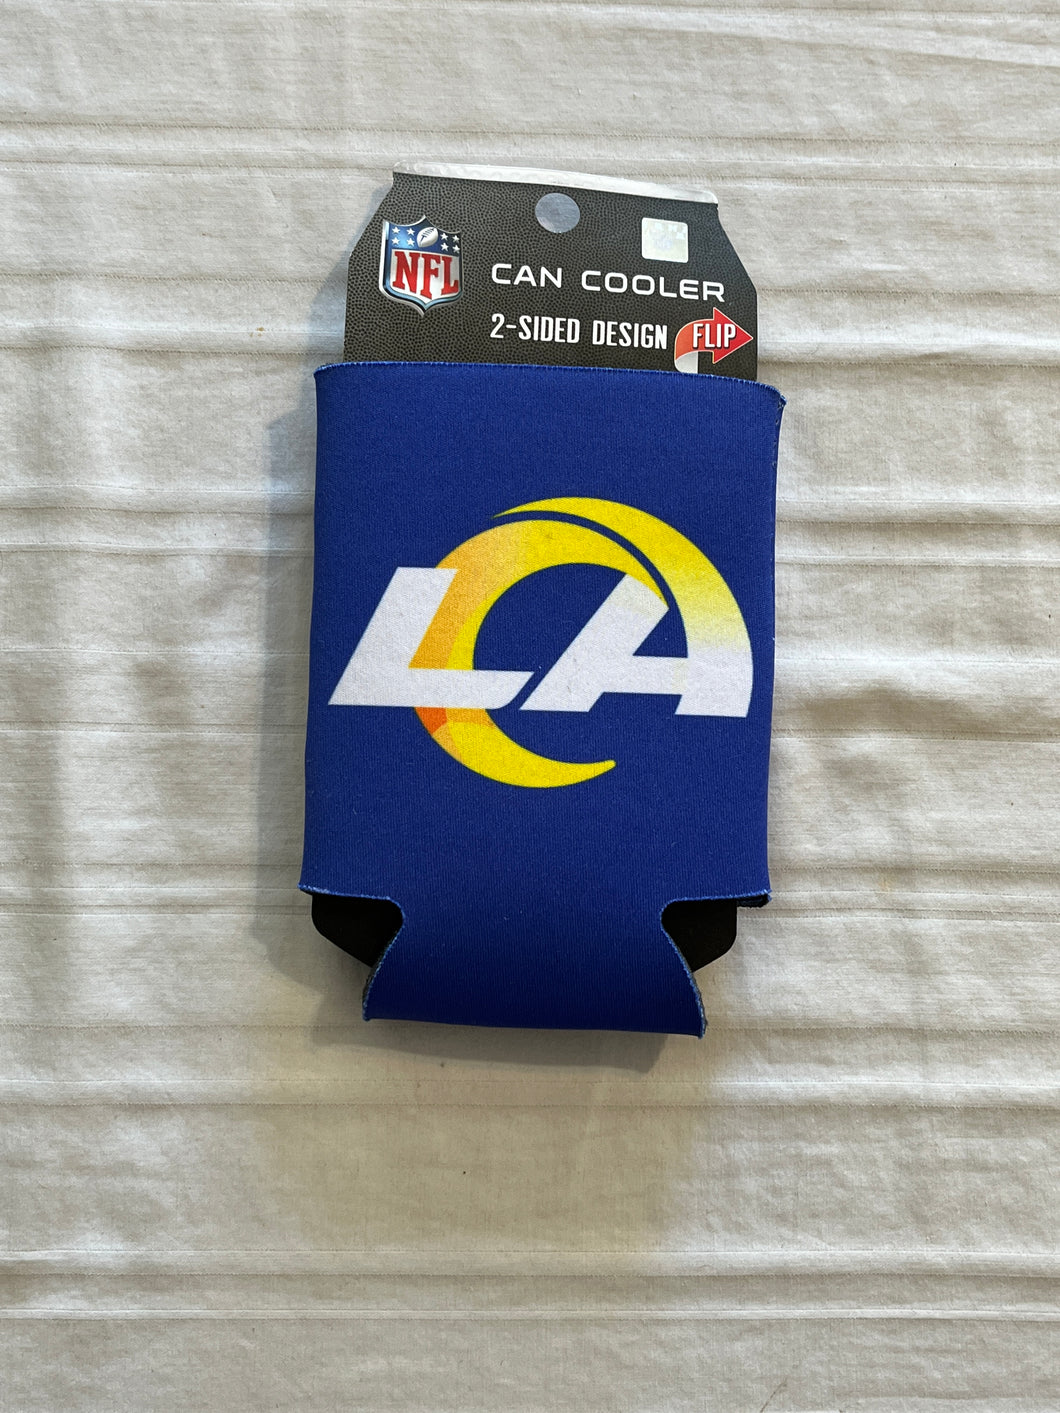 Los Angeles Rams NFL 2-Sided Koozies Coozies Can Cooler Wincraft - Casey's Sports Store